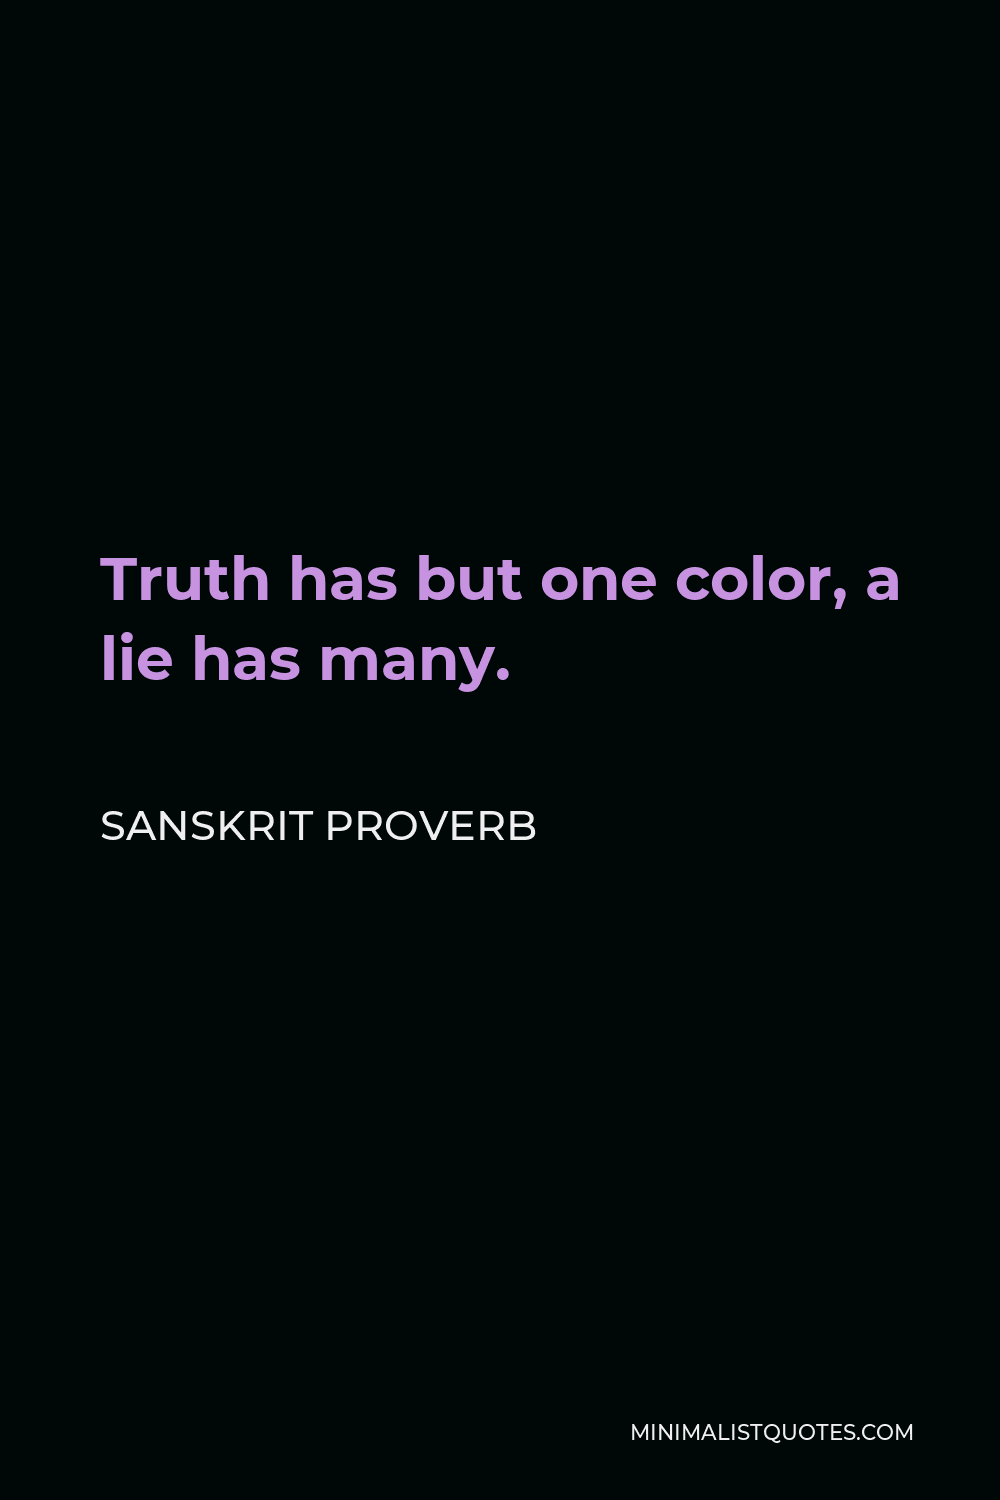 Sanskrit Proverb Quote - Truth has but one color, a lie has many.